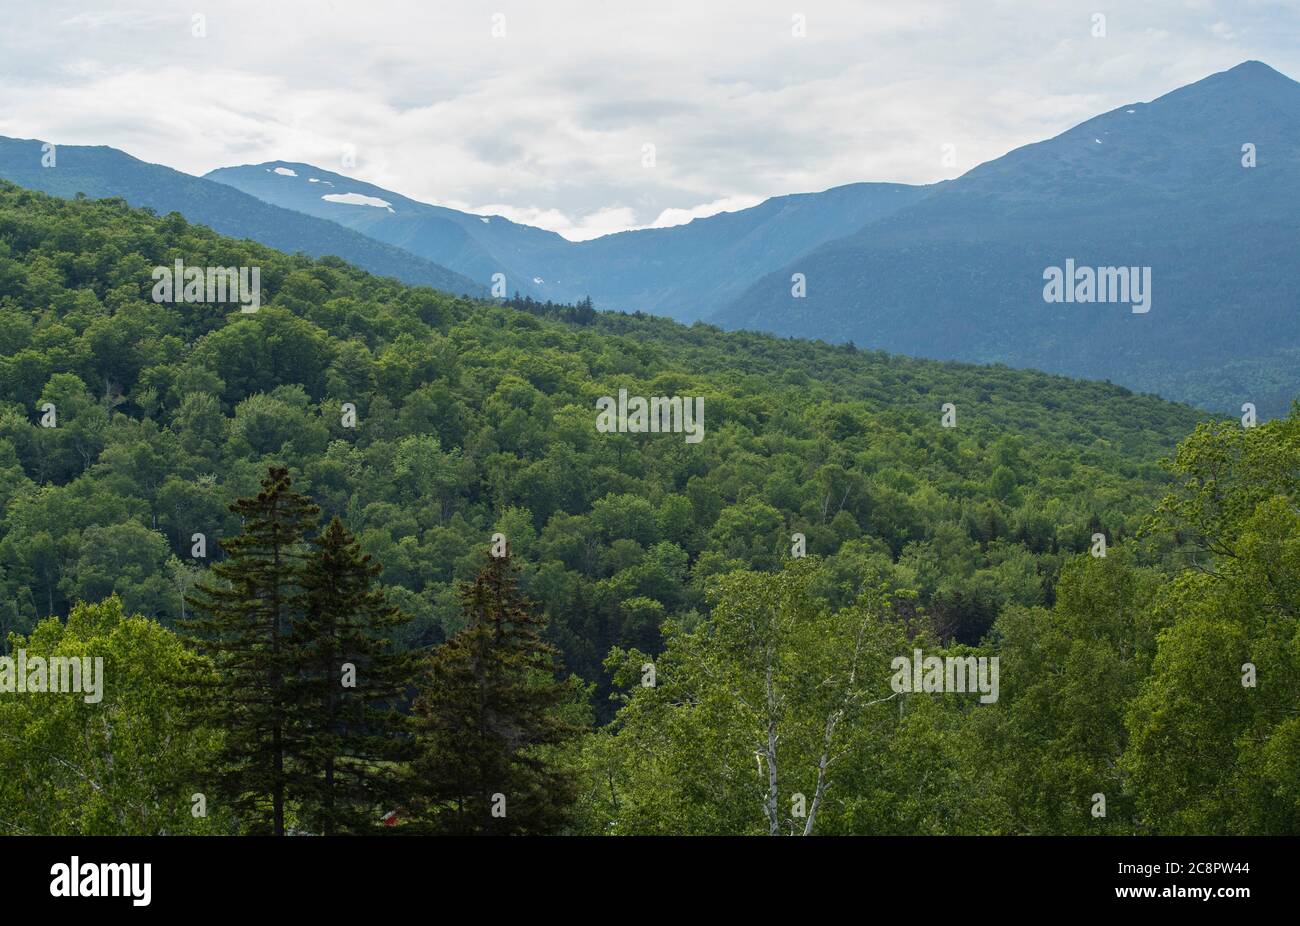 Mt Washington is New England's highest peak at 6,288 feet tall. Famous as a year round outdoor recreation region, with lots of ski areas. Northern NH. Stock Photo